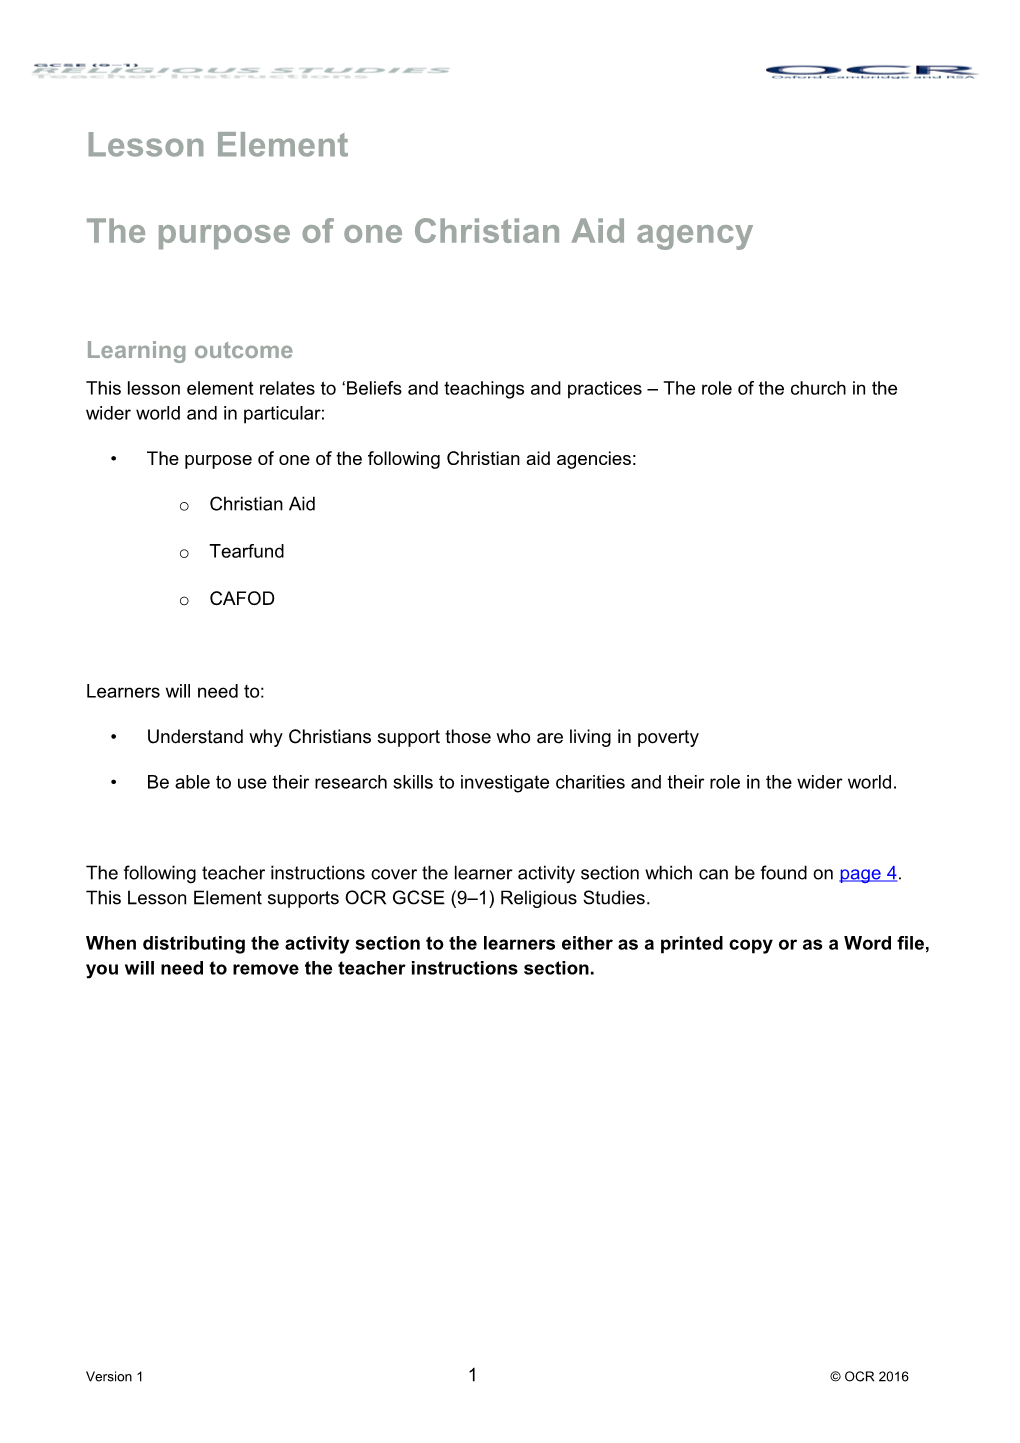 OCR GCSE Religious Studies Lesson Element - the Purpose of One Christina Aid Agency